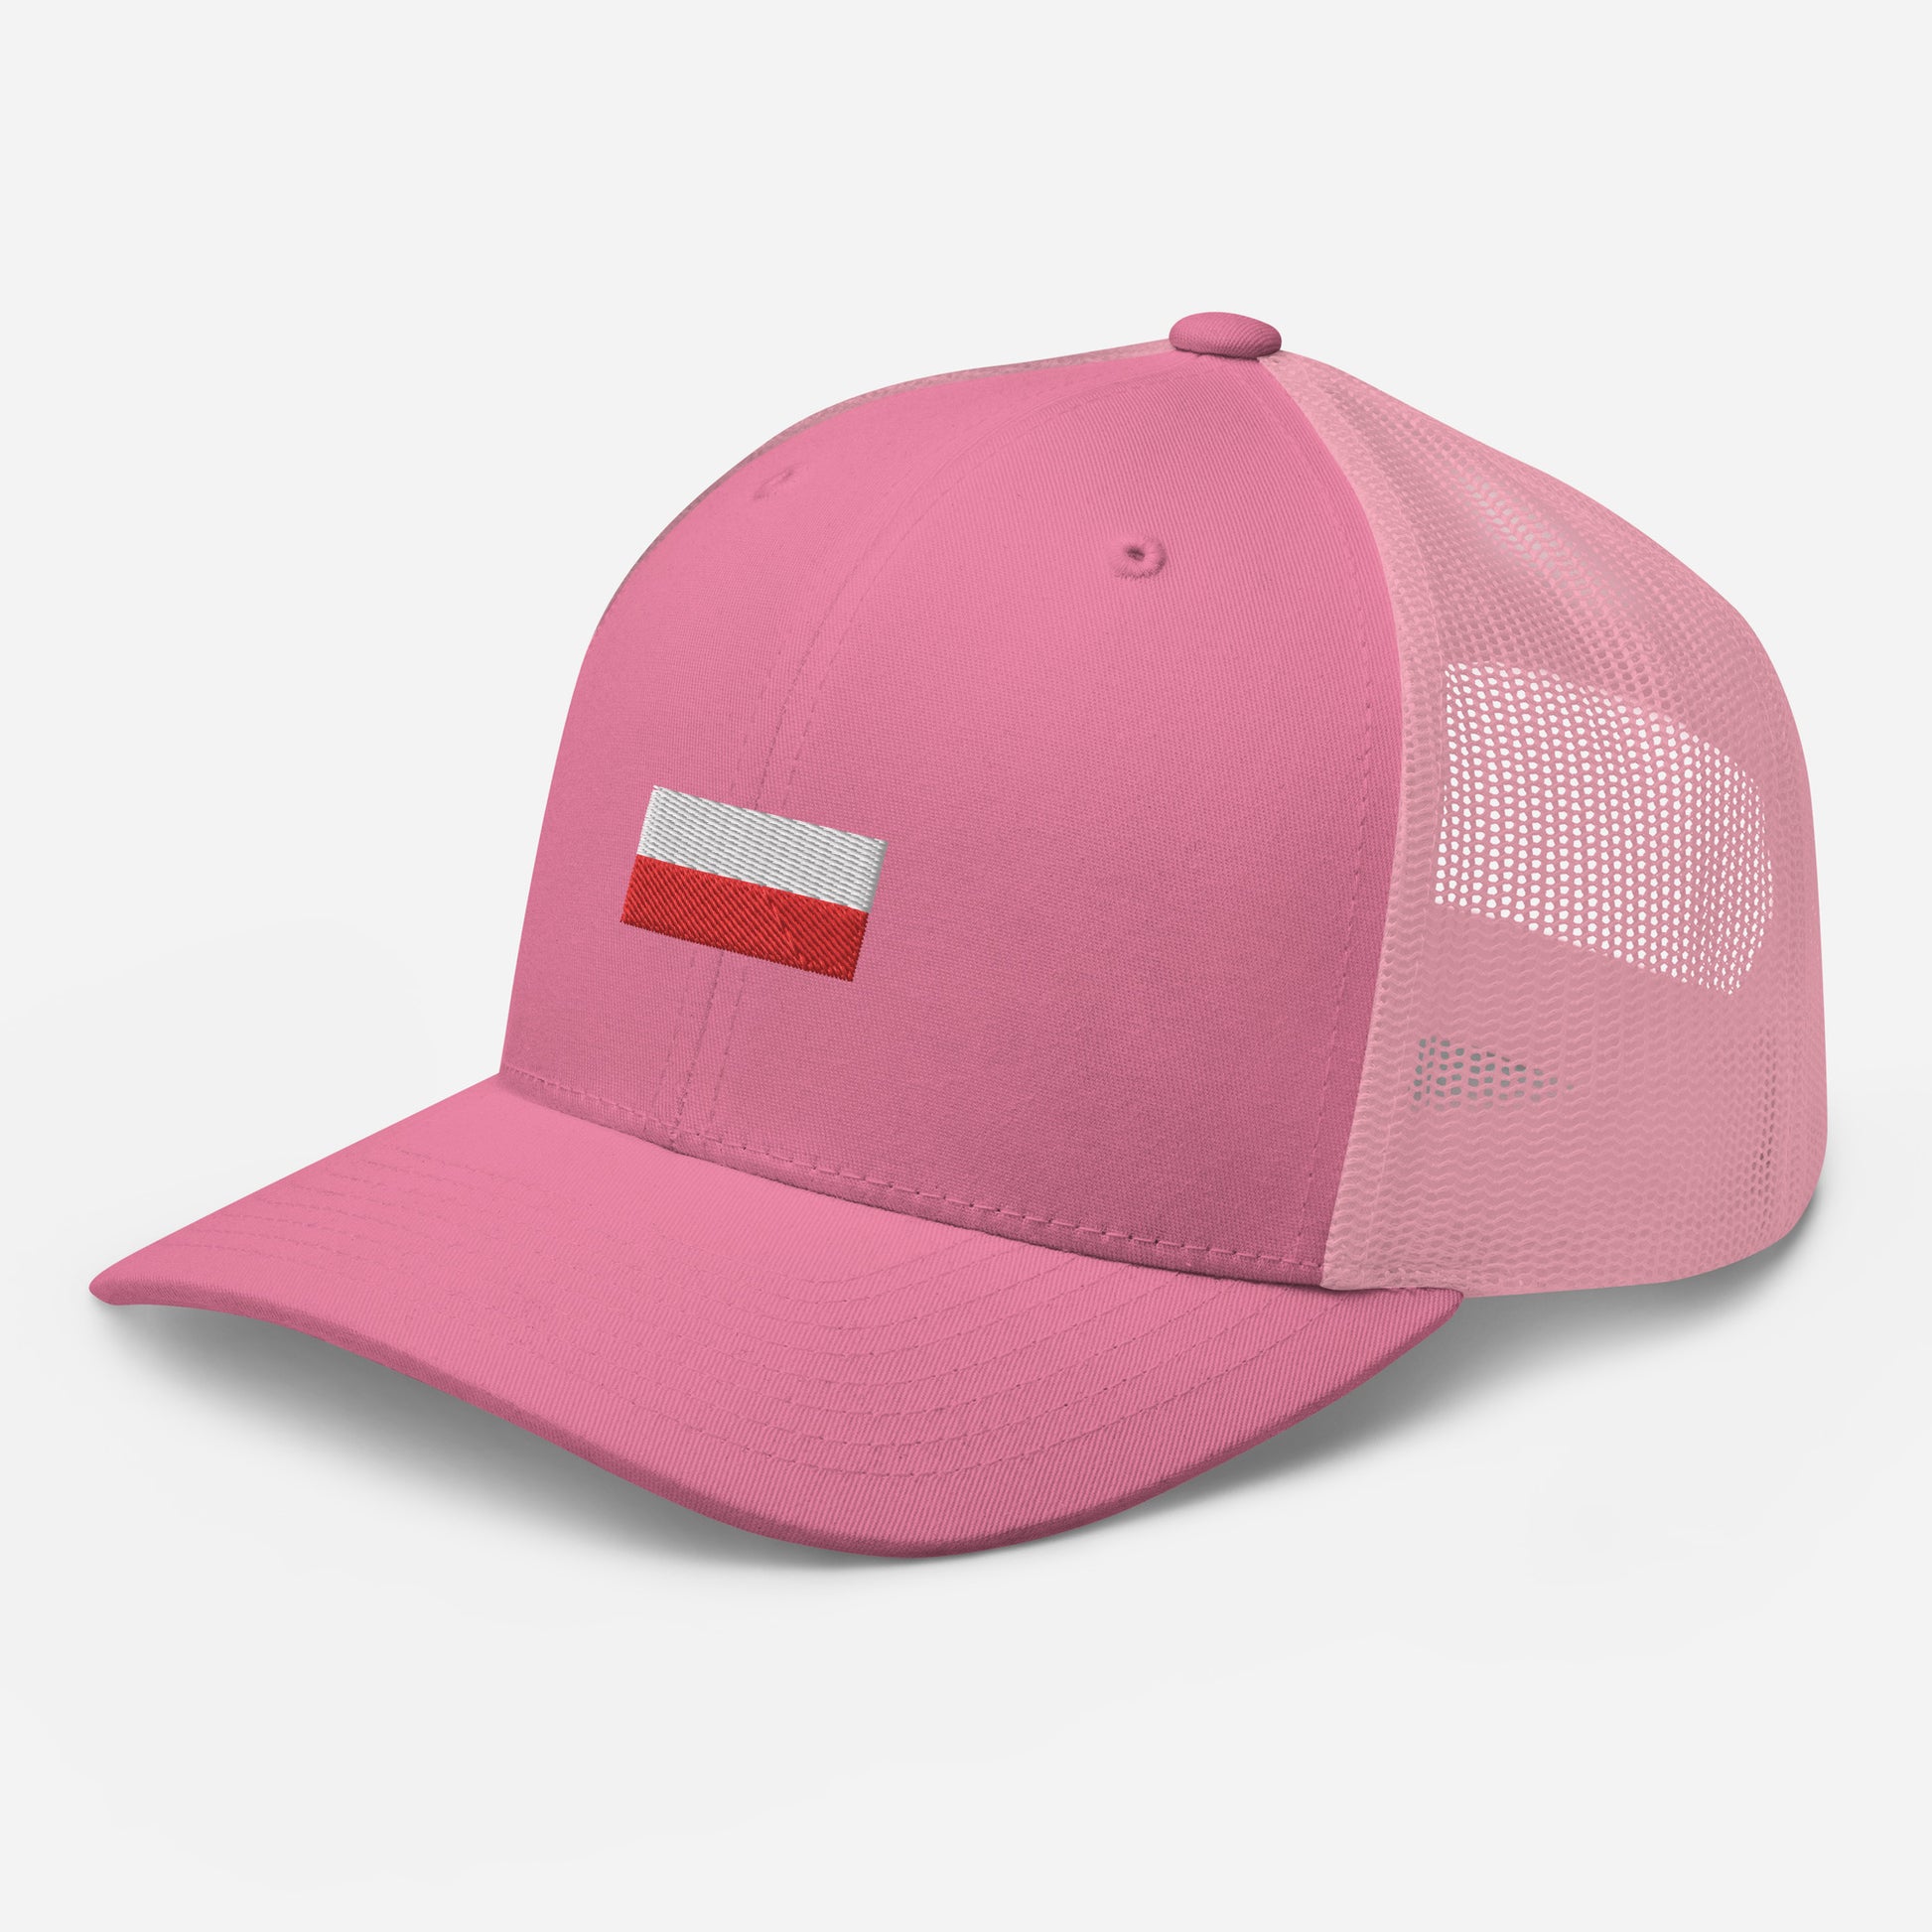 cap-from-the-front-with-polish-flag